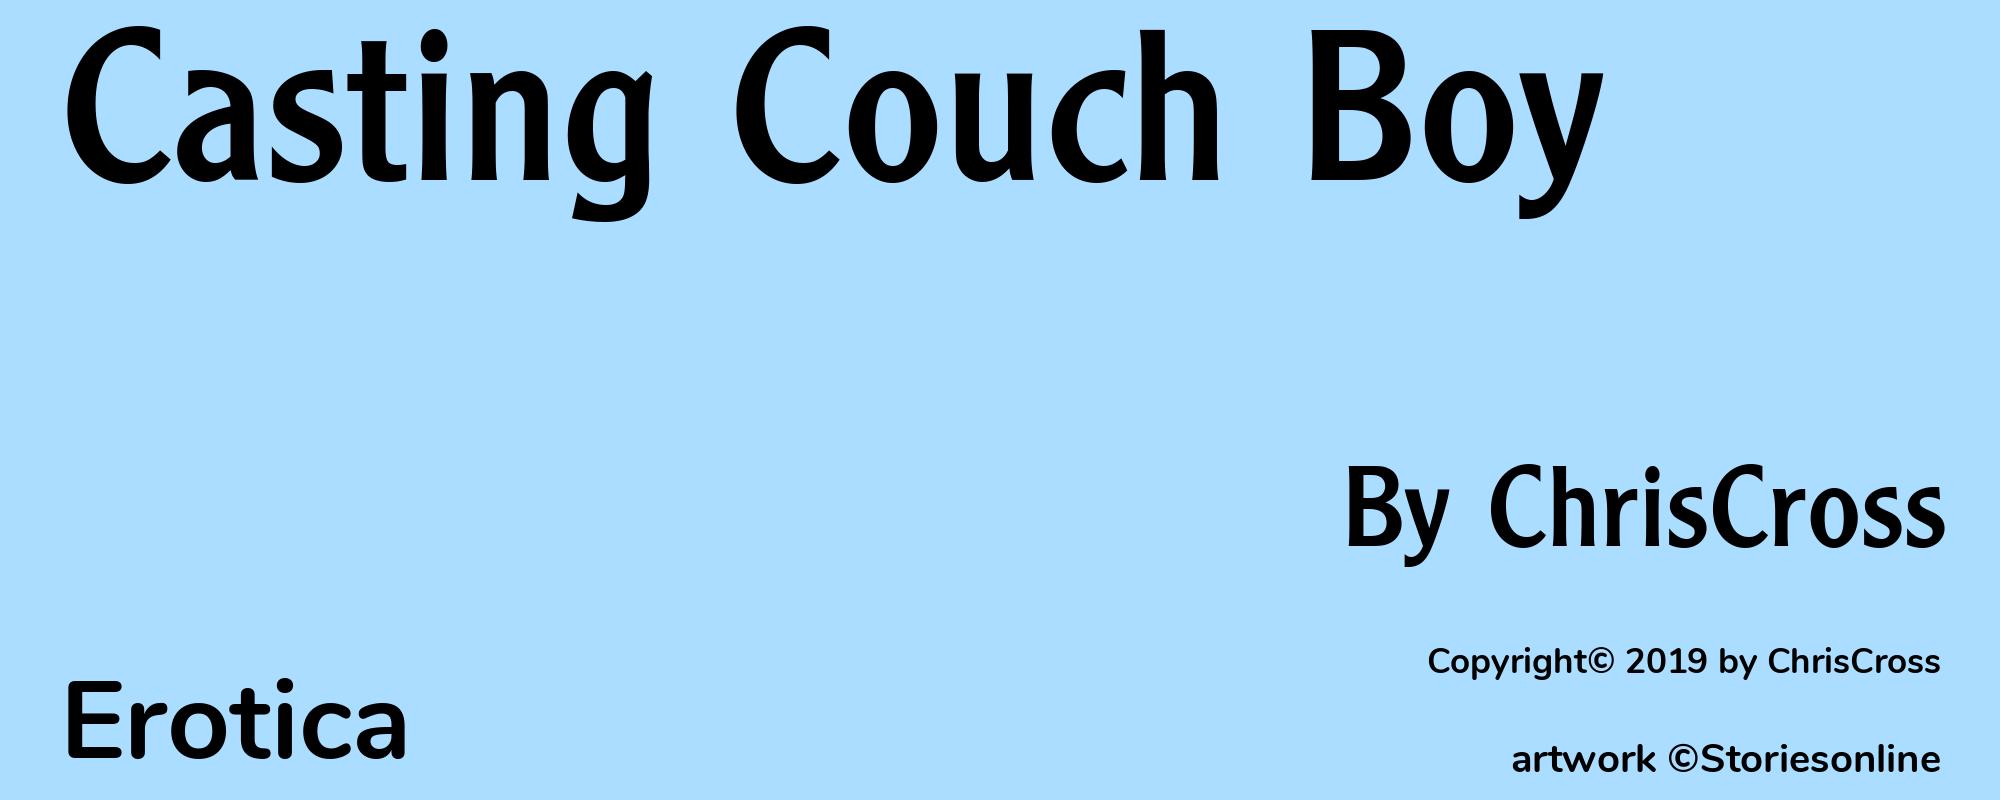 Casting Couch Boy - Cover